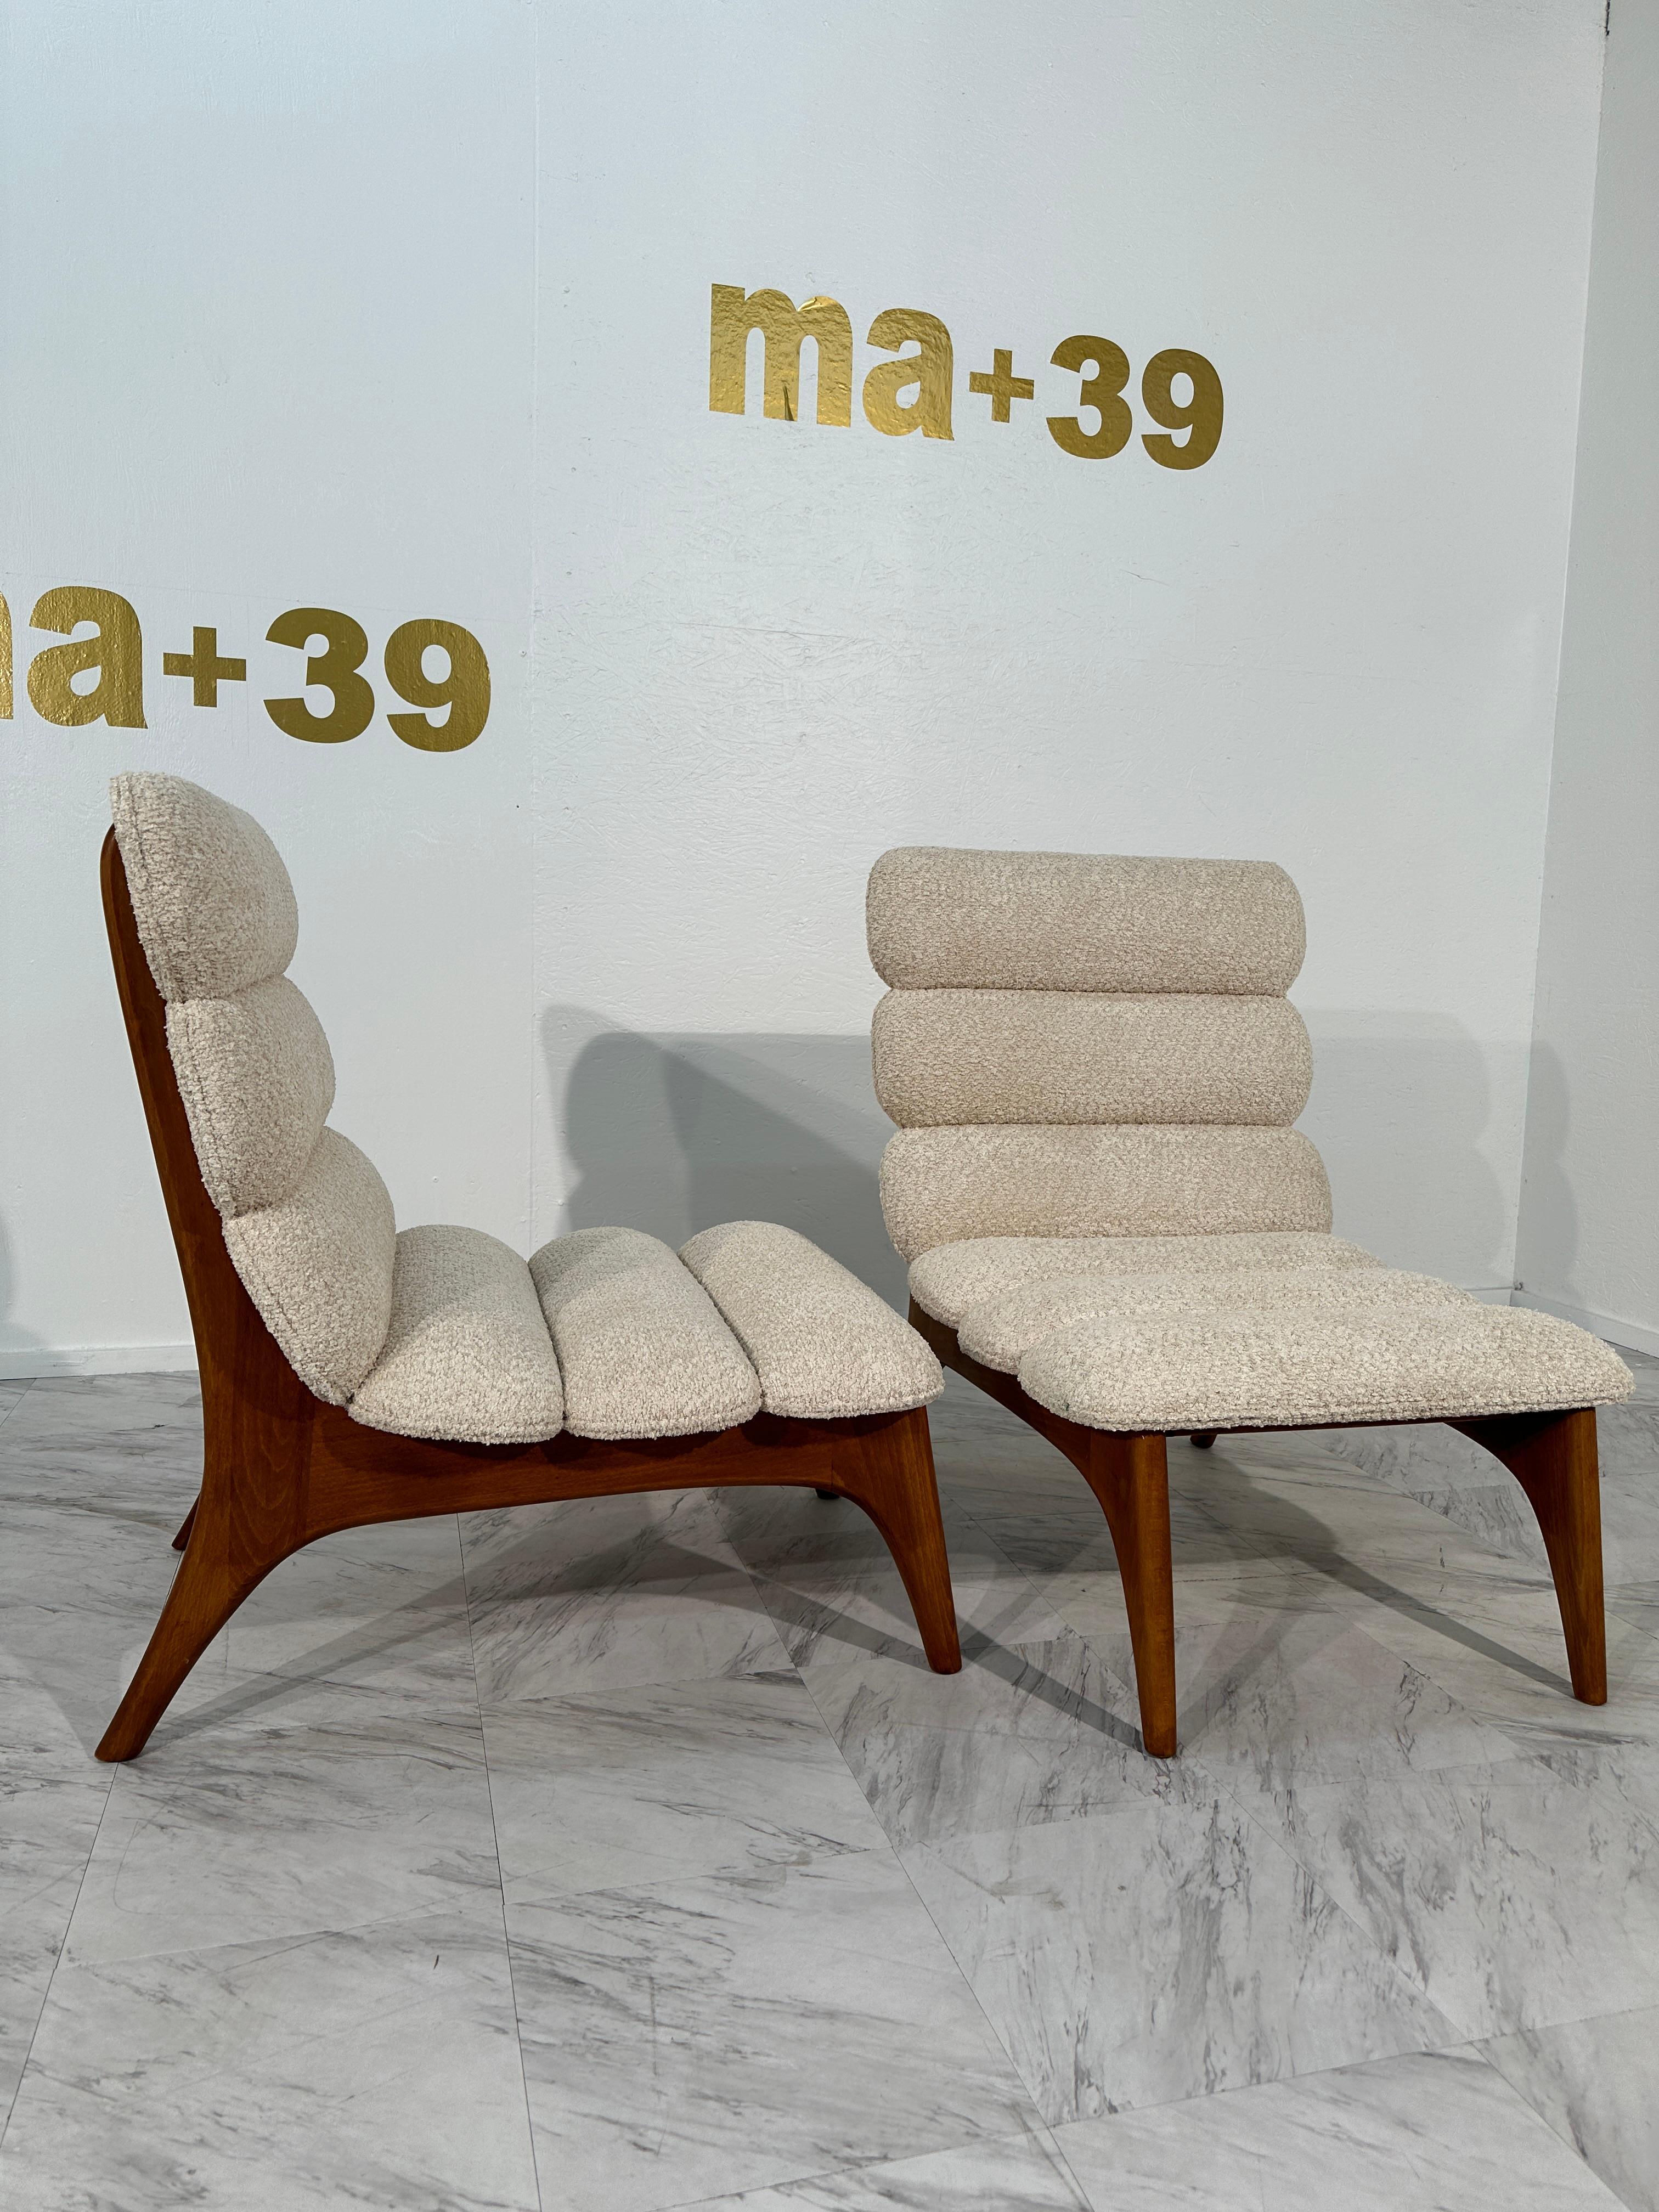 Late 20th Century Pair of Mid-Century Modern Danish Lounge Chairs in Boucle Fabric 1980s For Sale